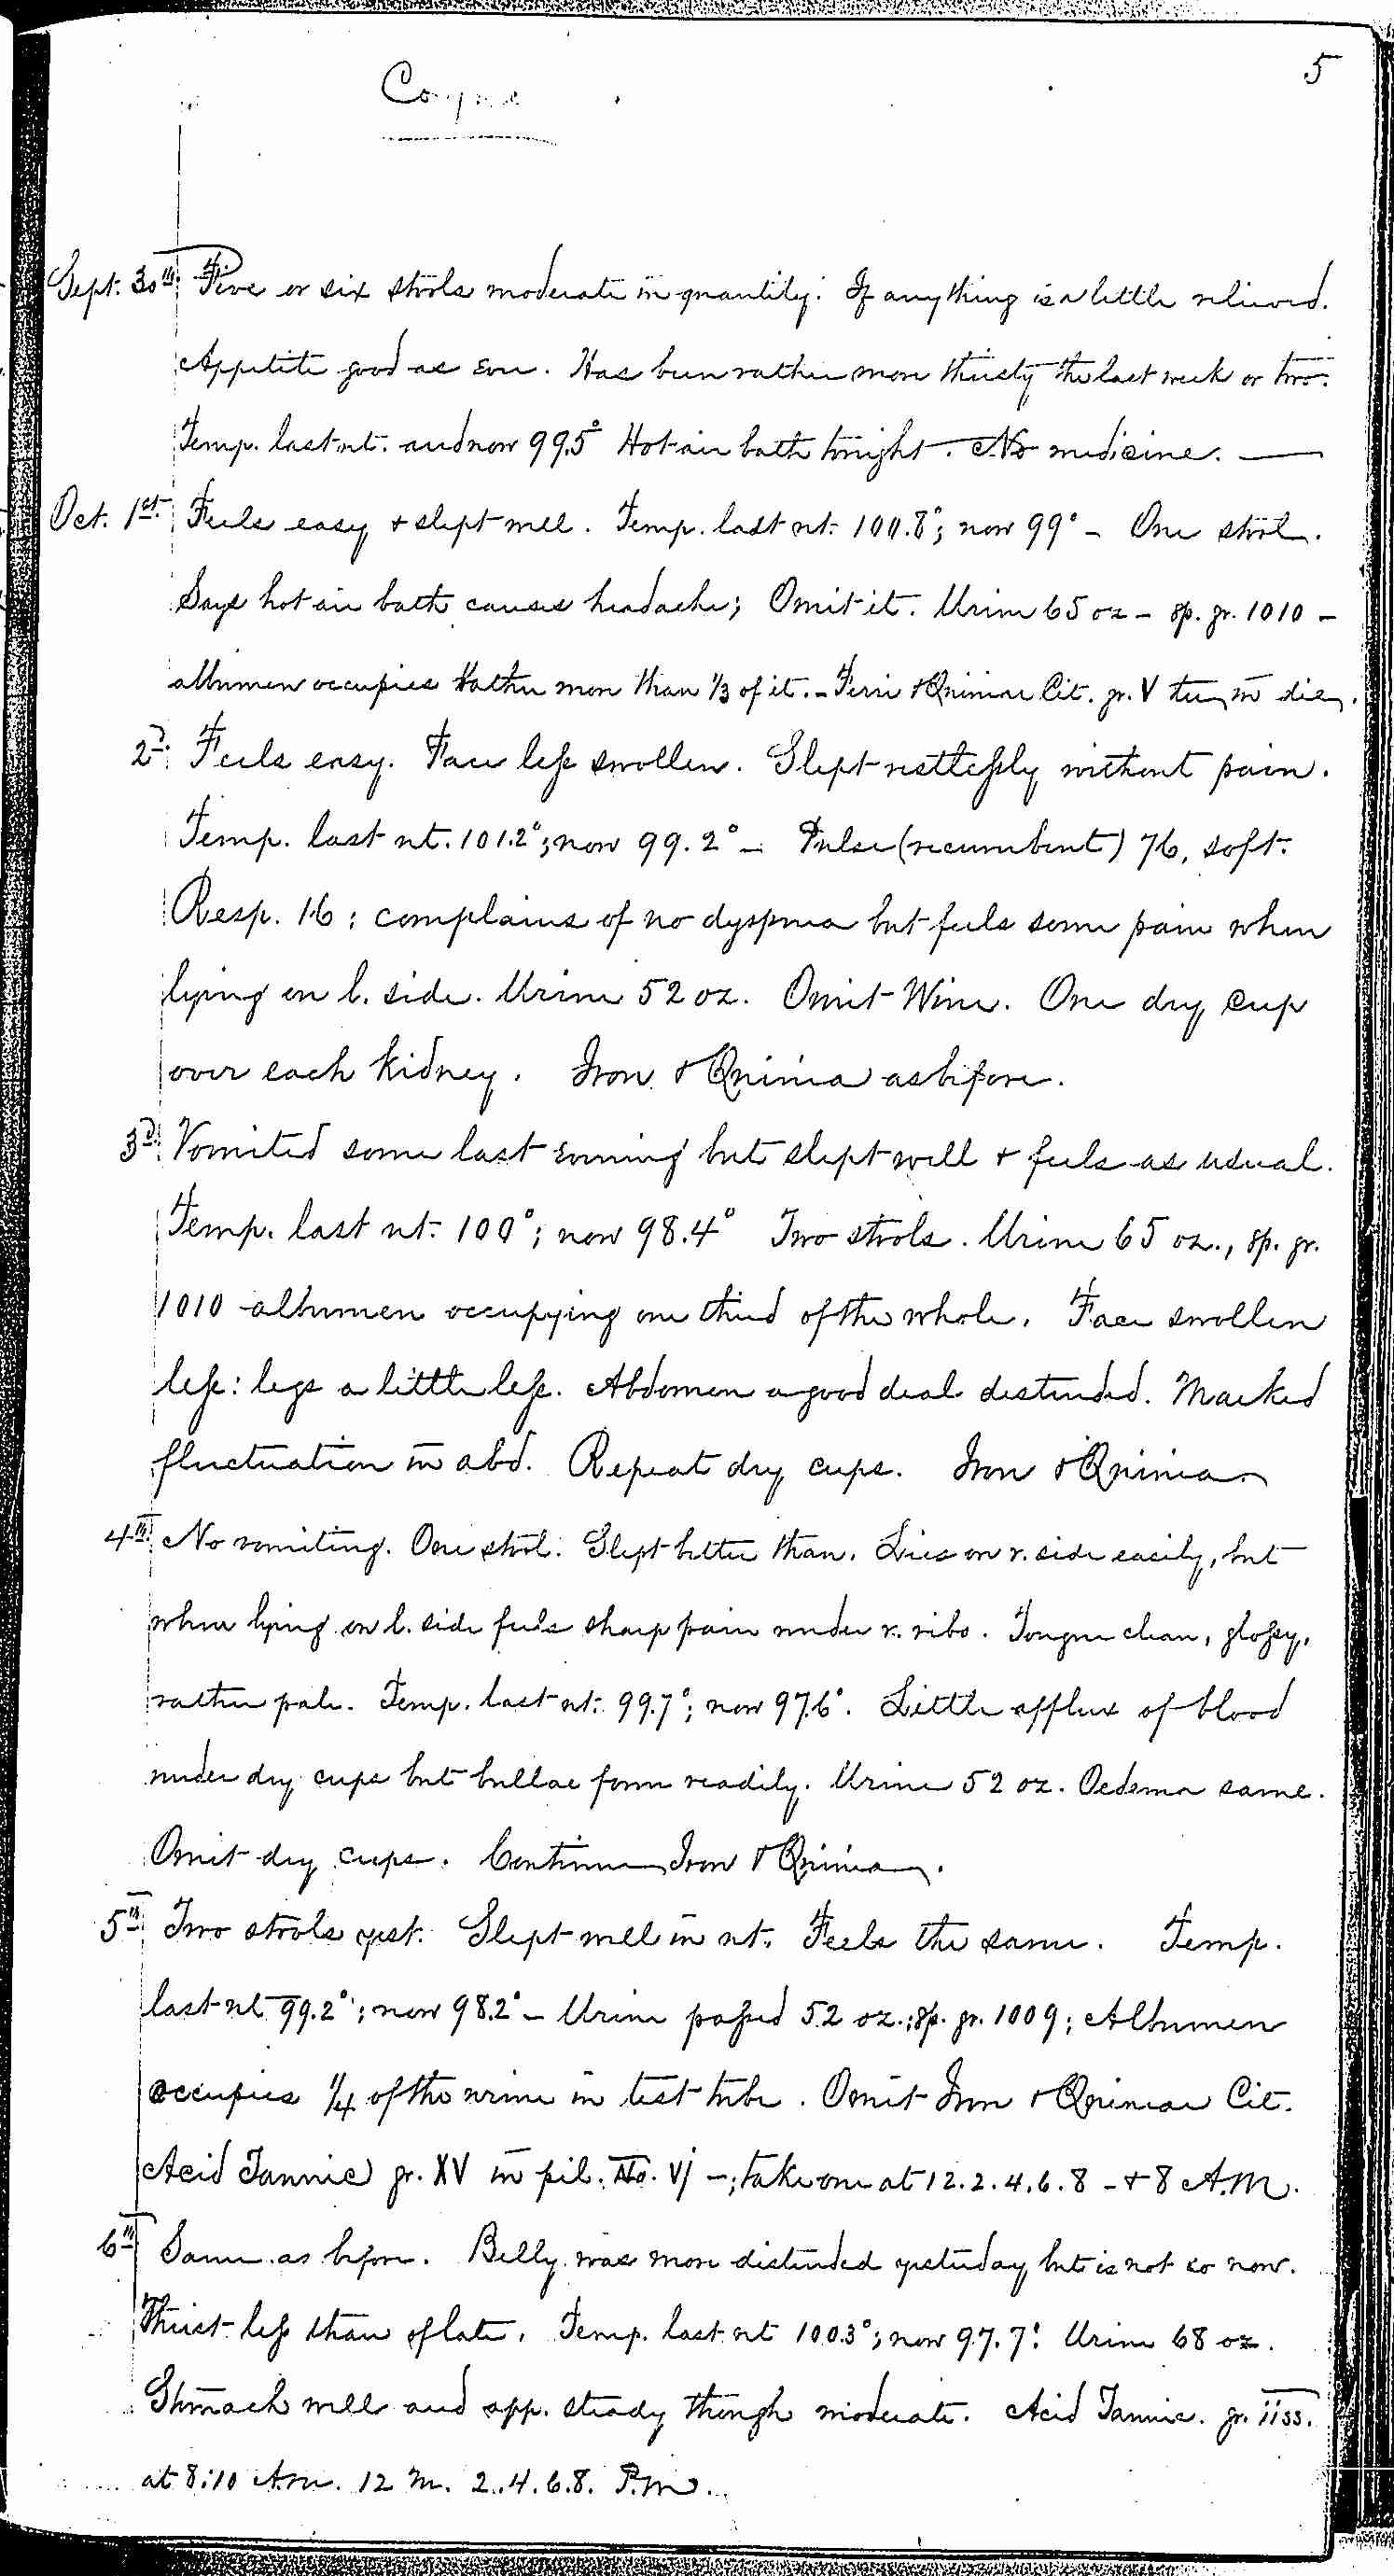 Entry for Bernard Coyne (page 5 of 13) in the log Hospital Tickets and Case Papers - Naval Hospital - Washington, D.C. - 1868-69